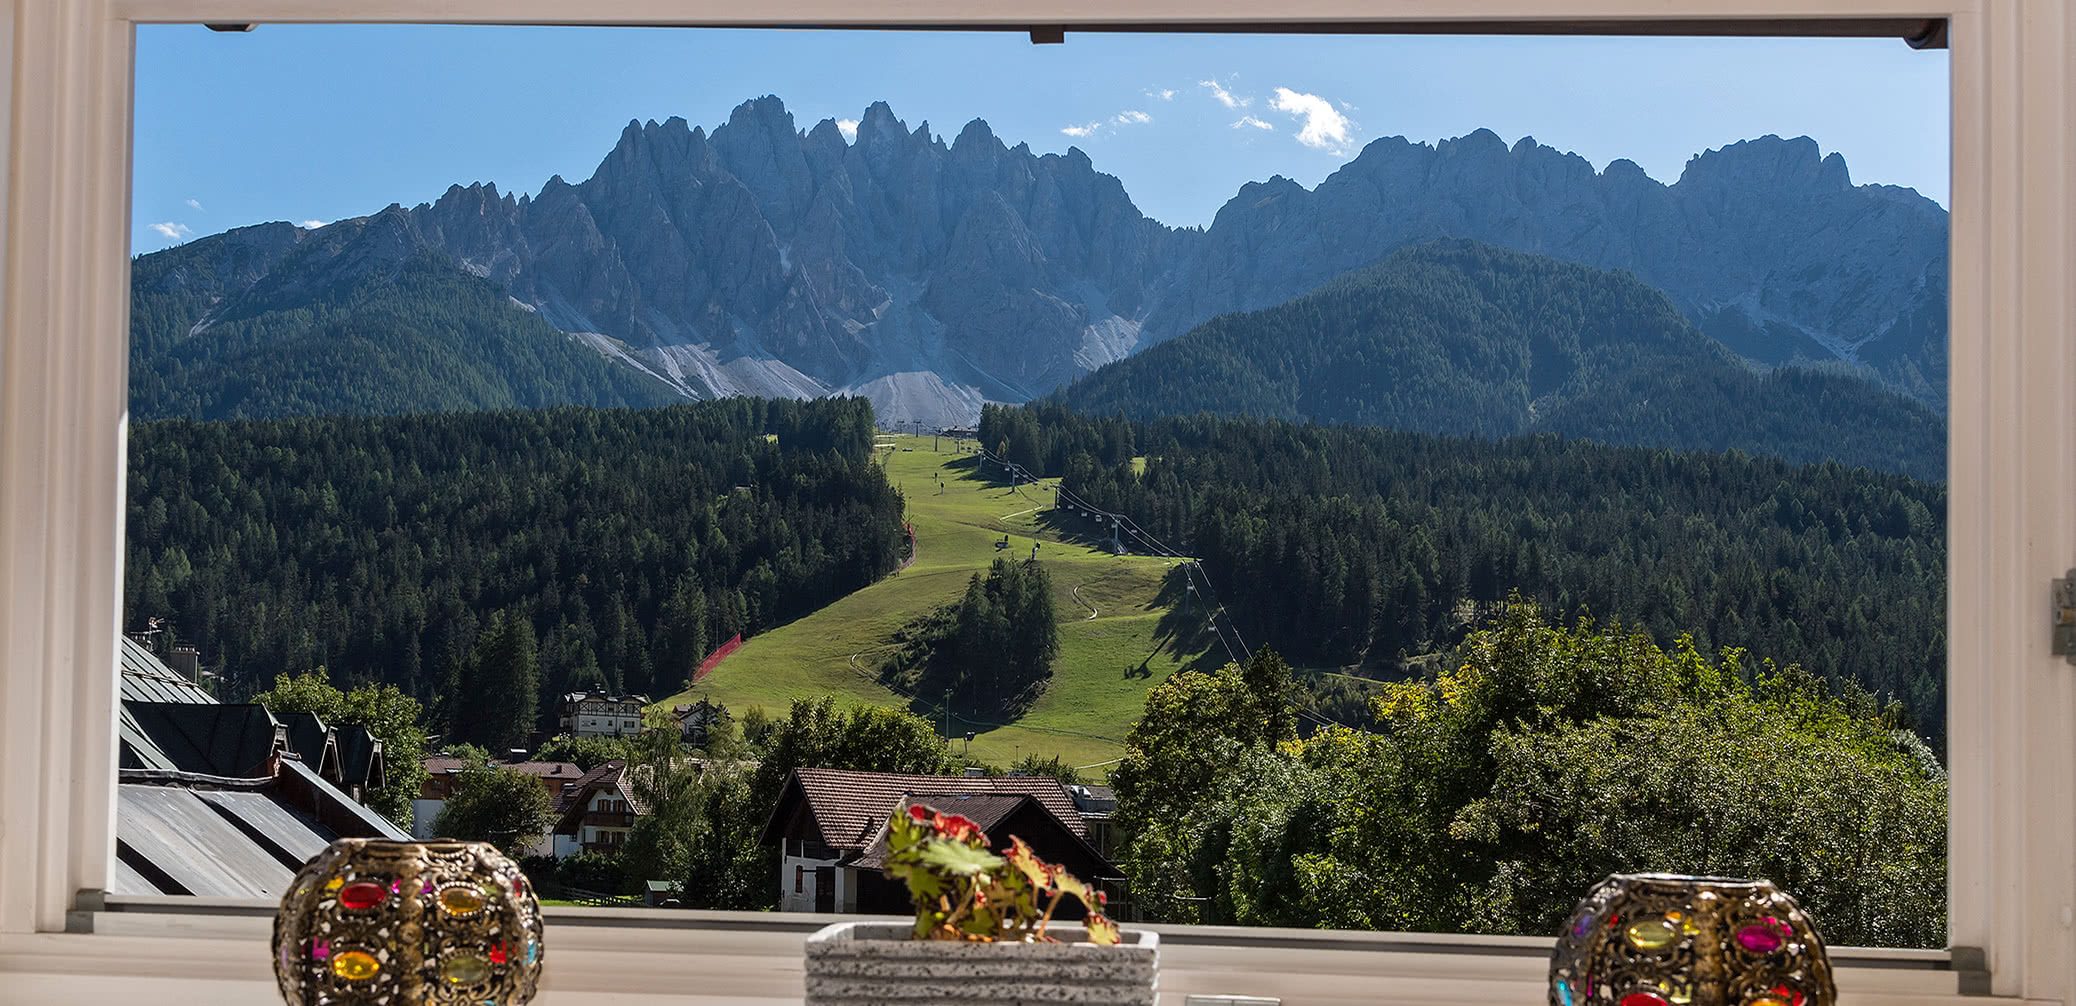 Review: Boutique Hotel Zenana In The Italian Dolomites